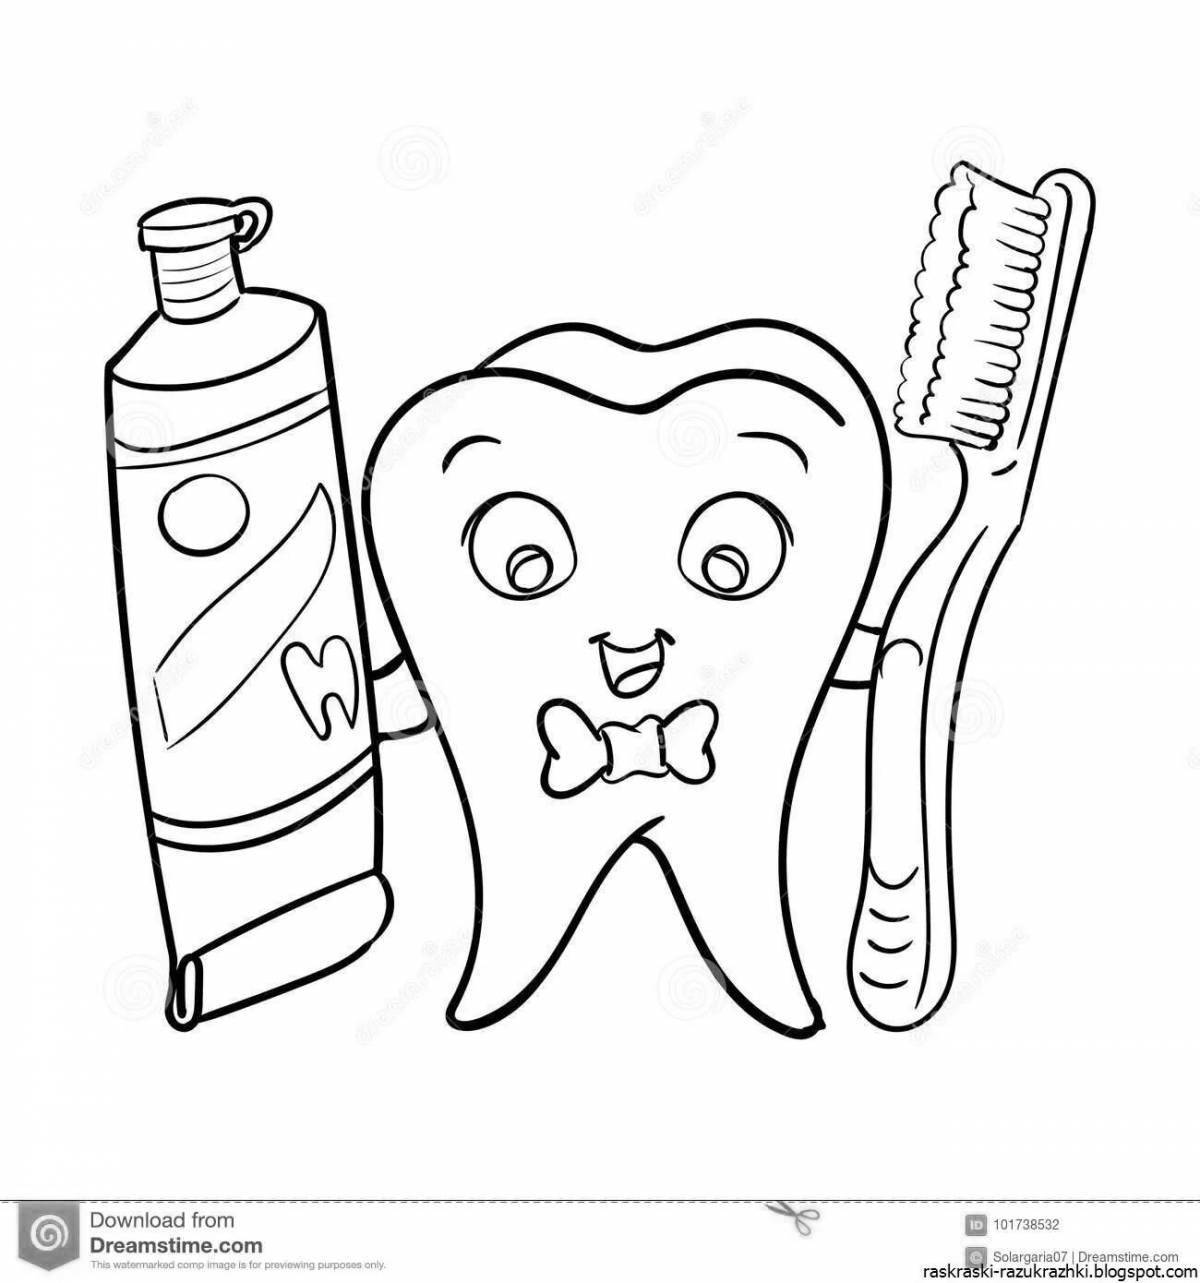 Radiant coloring page toothpaste for babies